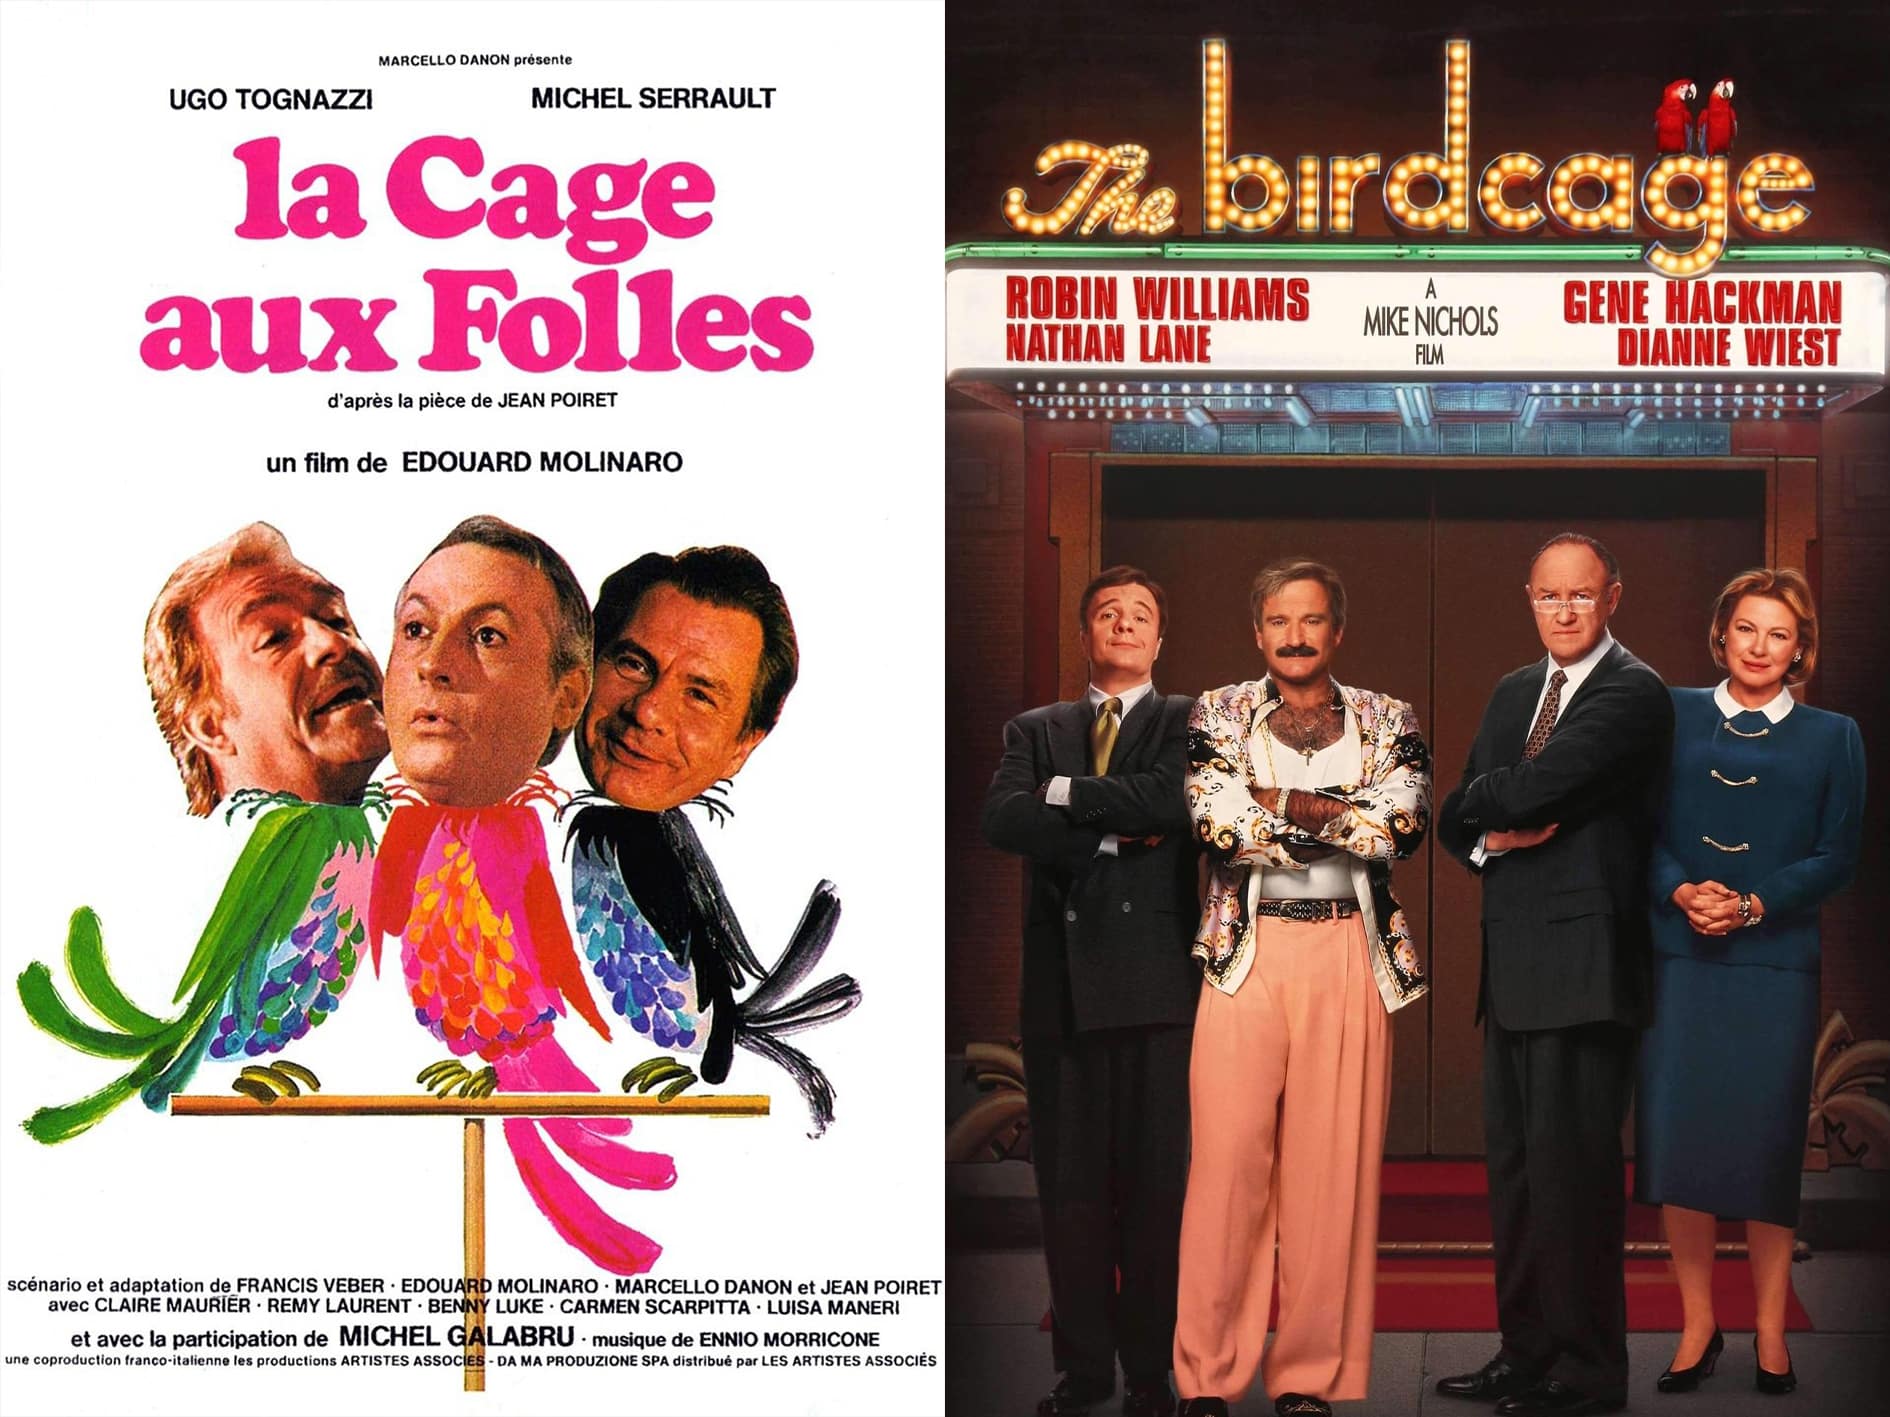 10 Things You Might Not Have Known About The Birdcage